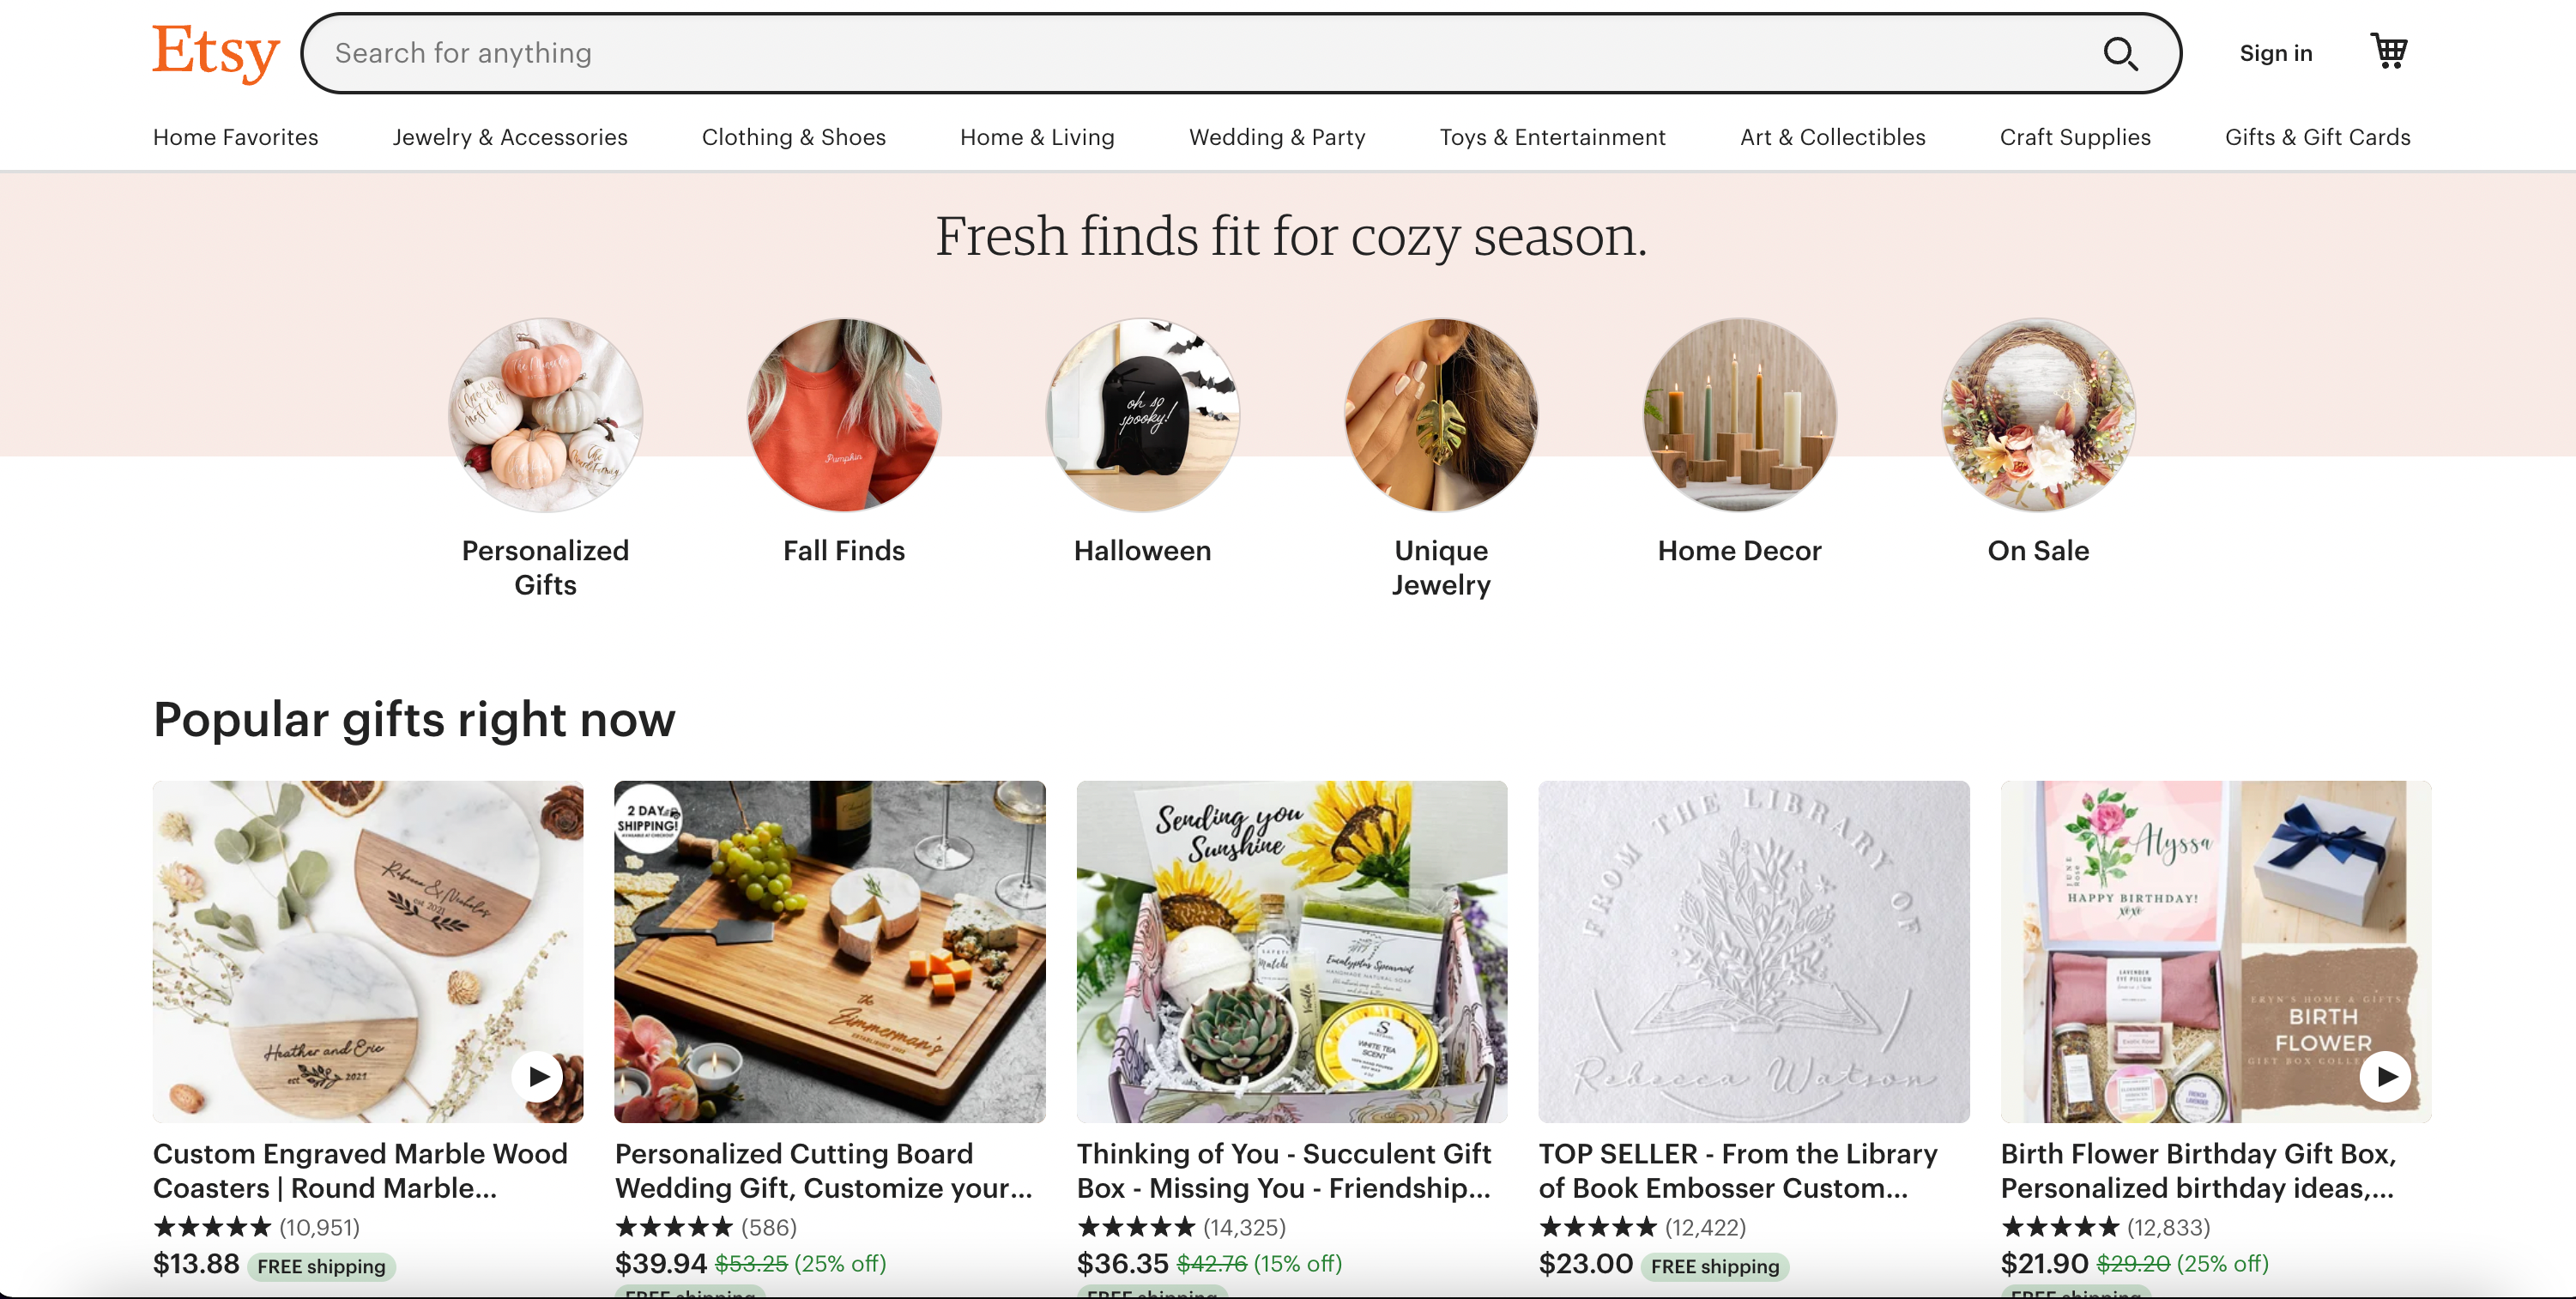 How to Sell on Etsy: A Beginner's Guide for 2022 Sellers - Jungle Scout